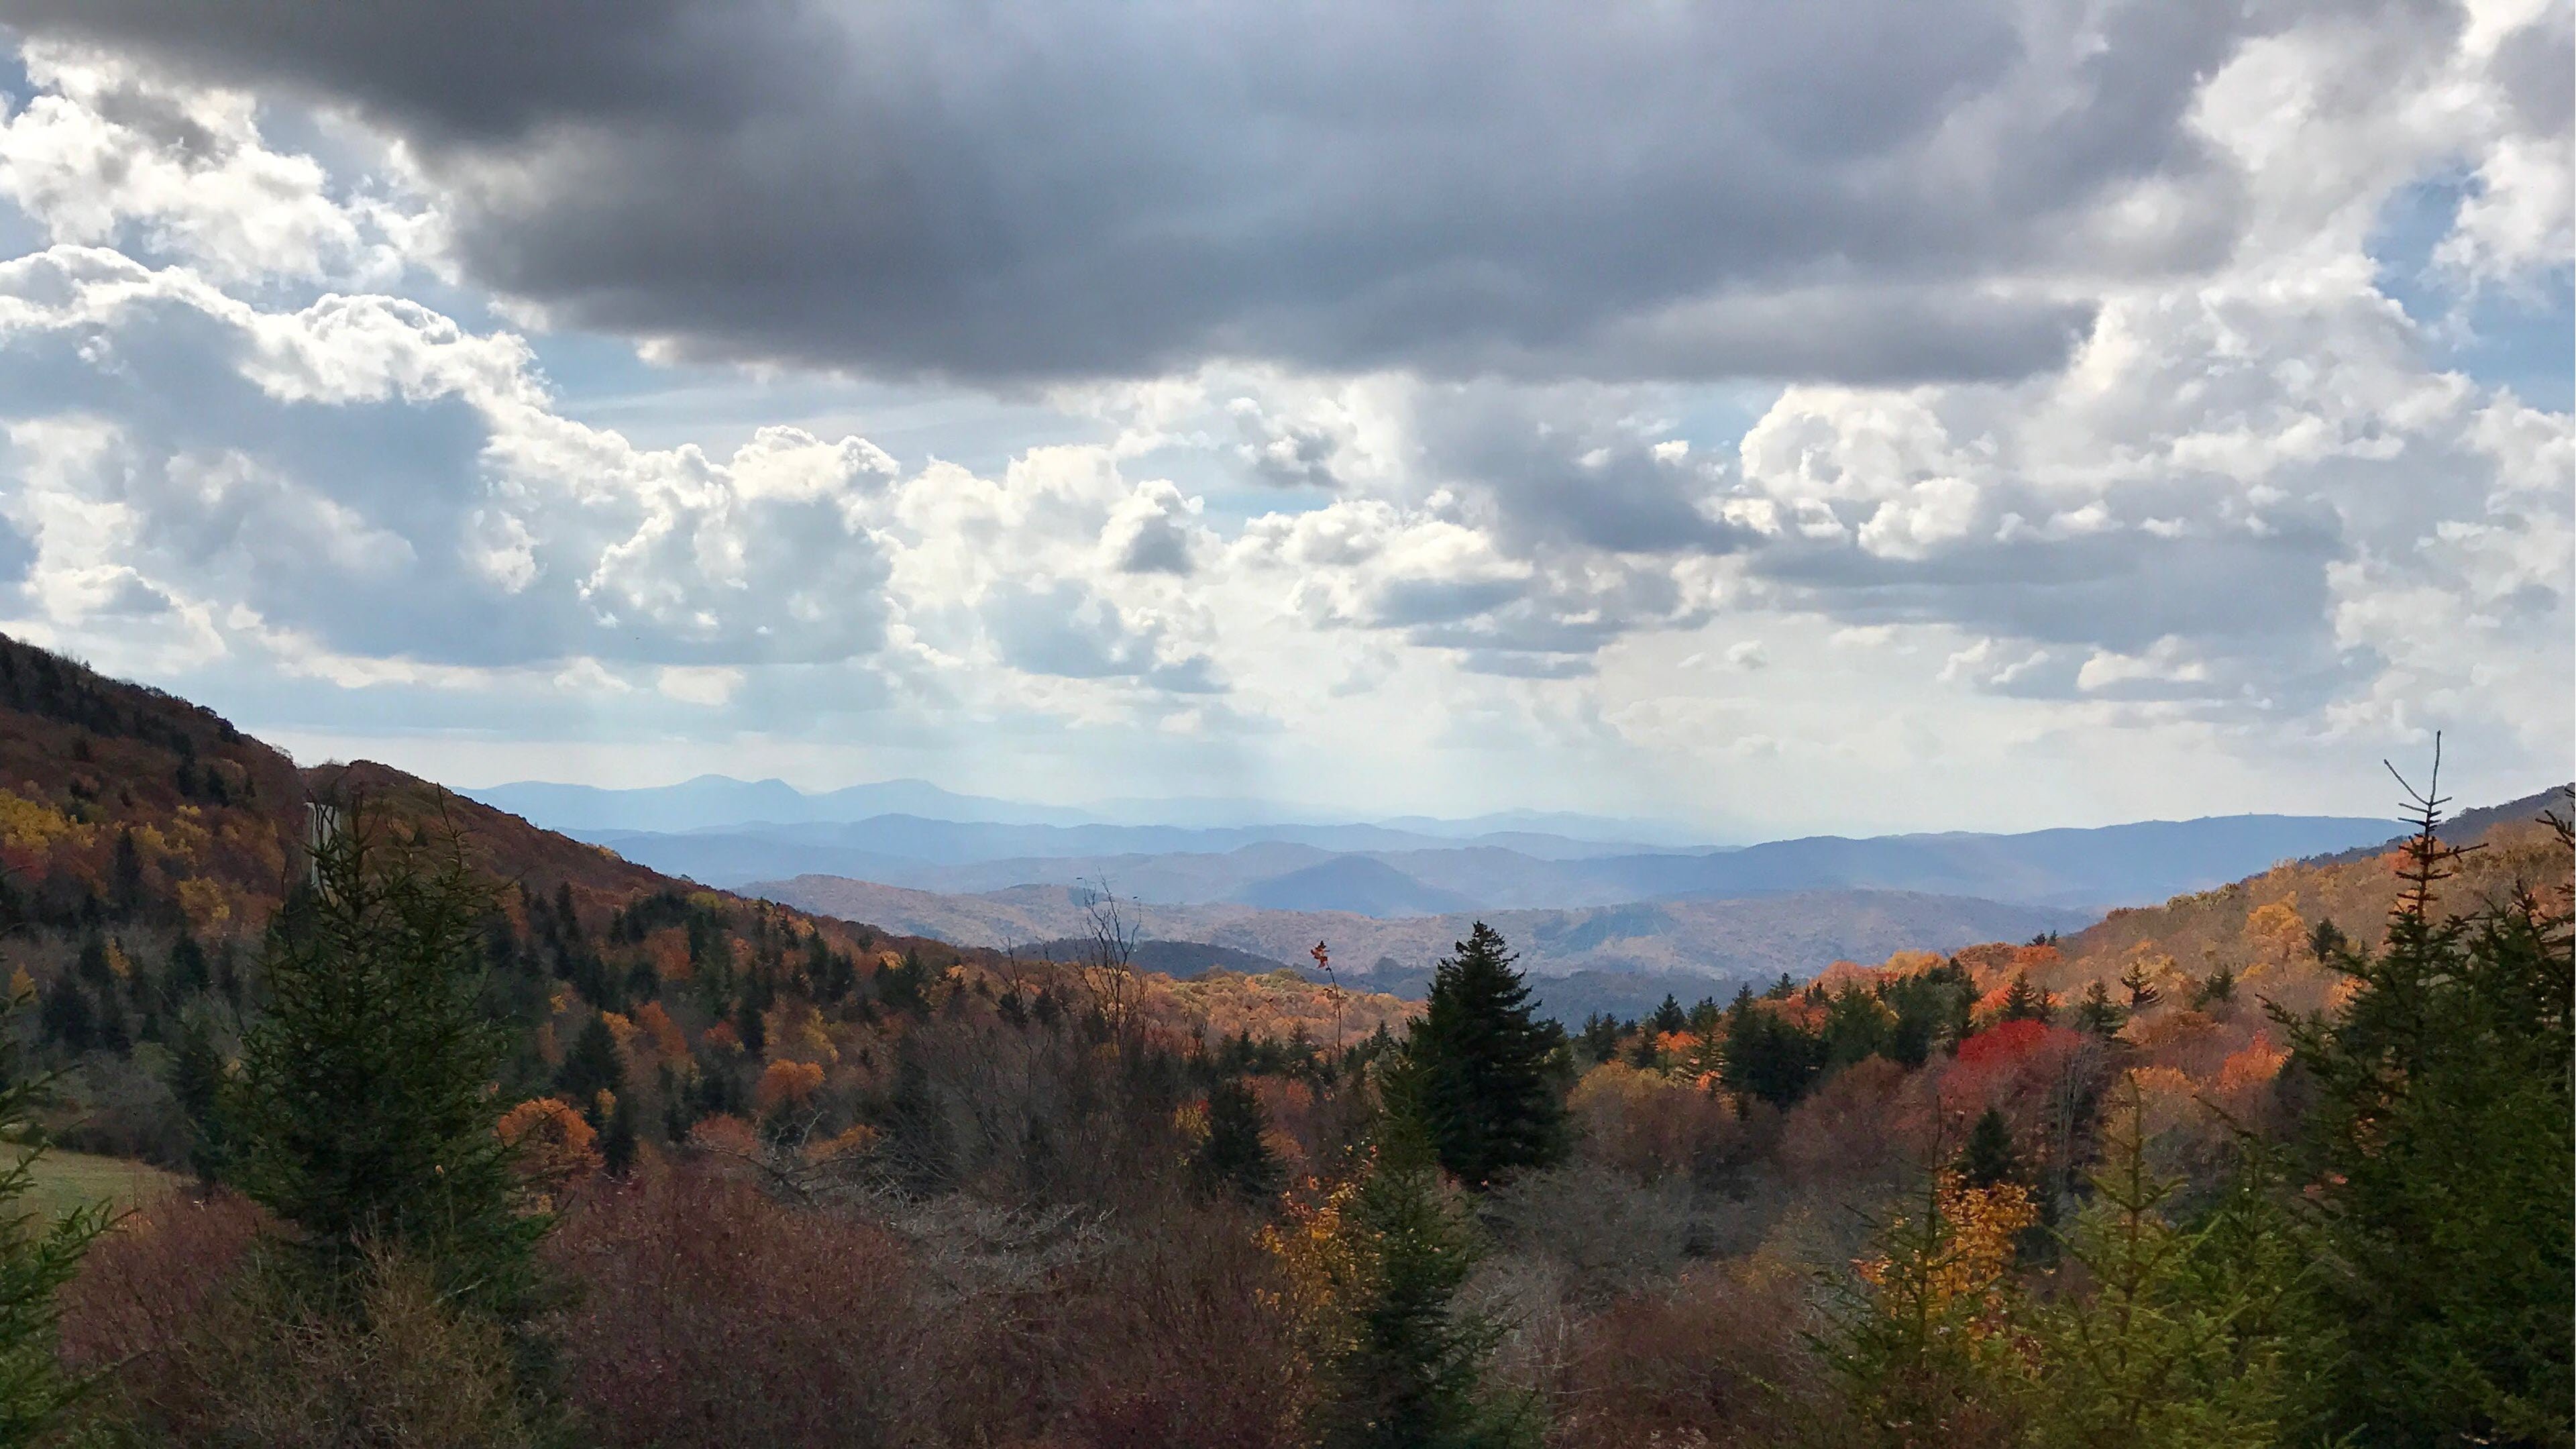 Enjoy the beauty of the Berkshires and Appalachian Trail nearby